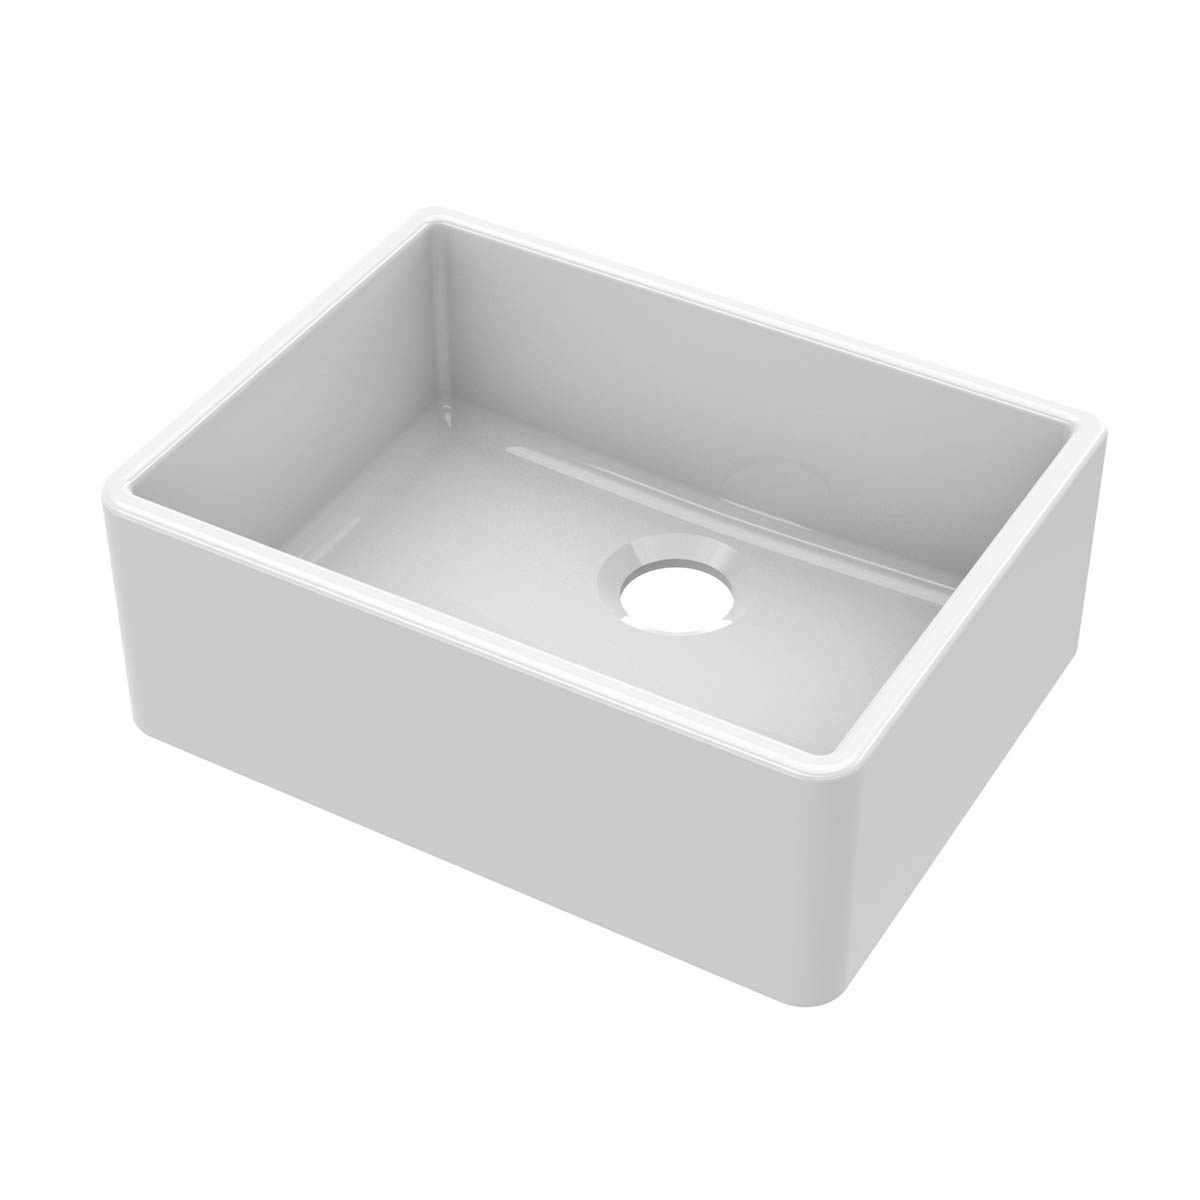 Nuie Butler 595x450x220mm Fireclay Sink with Central Waste - White (20282)